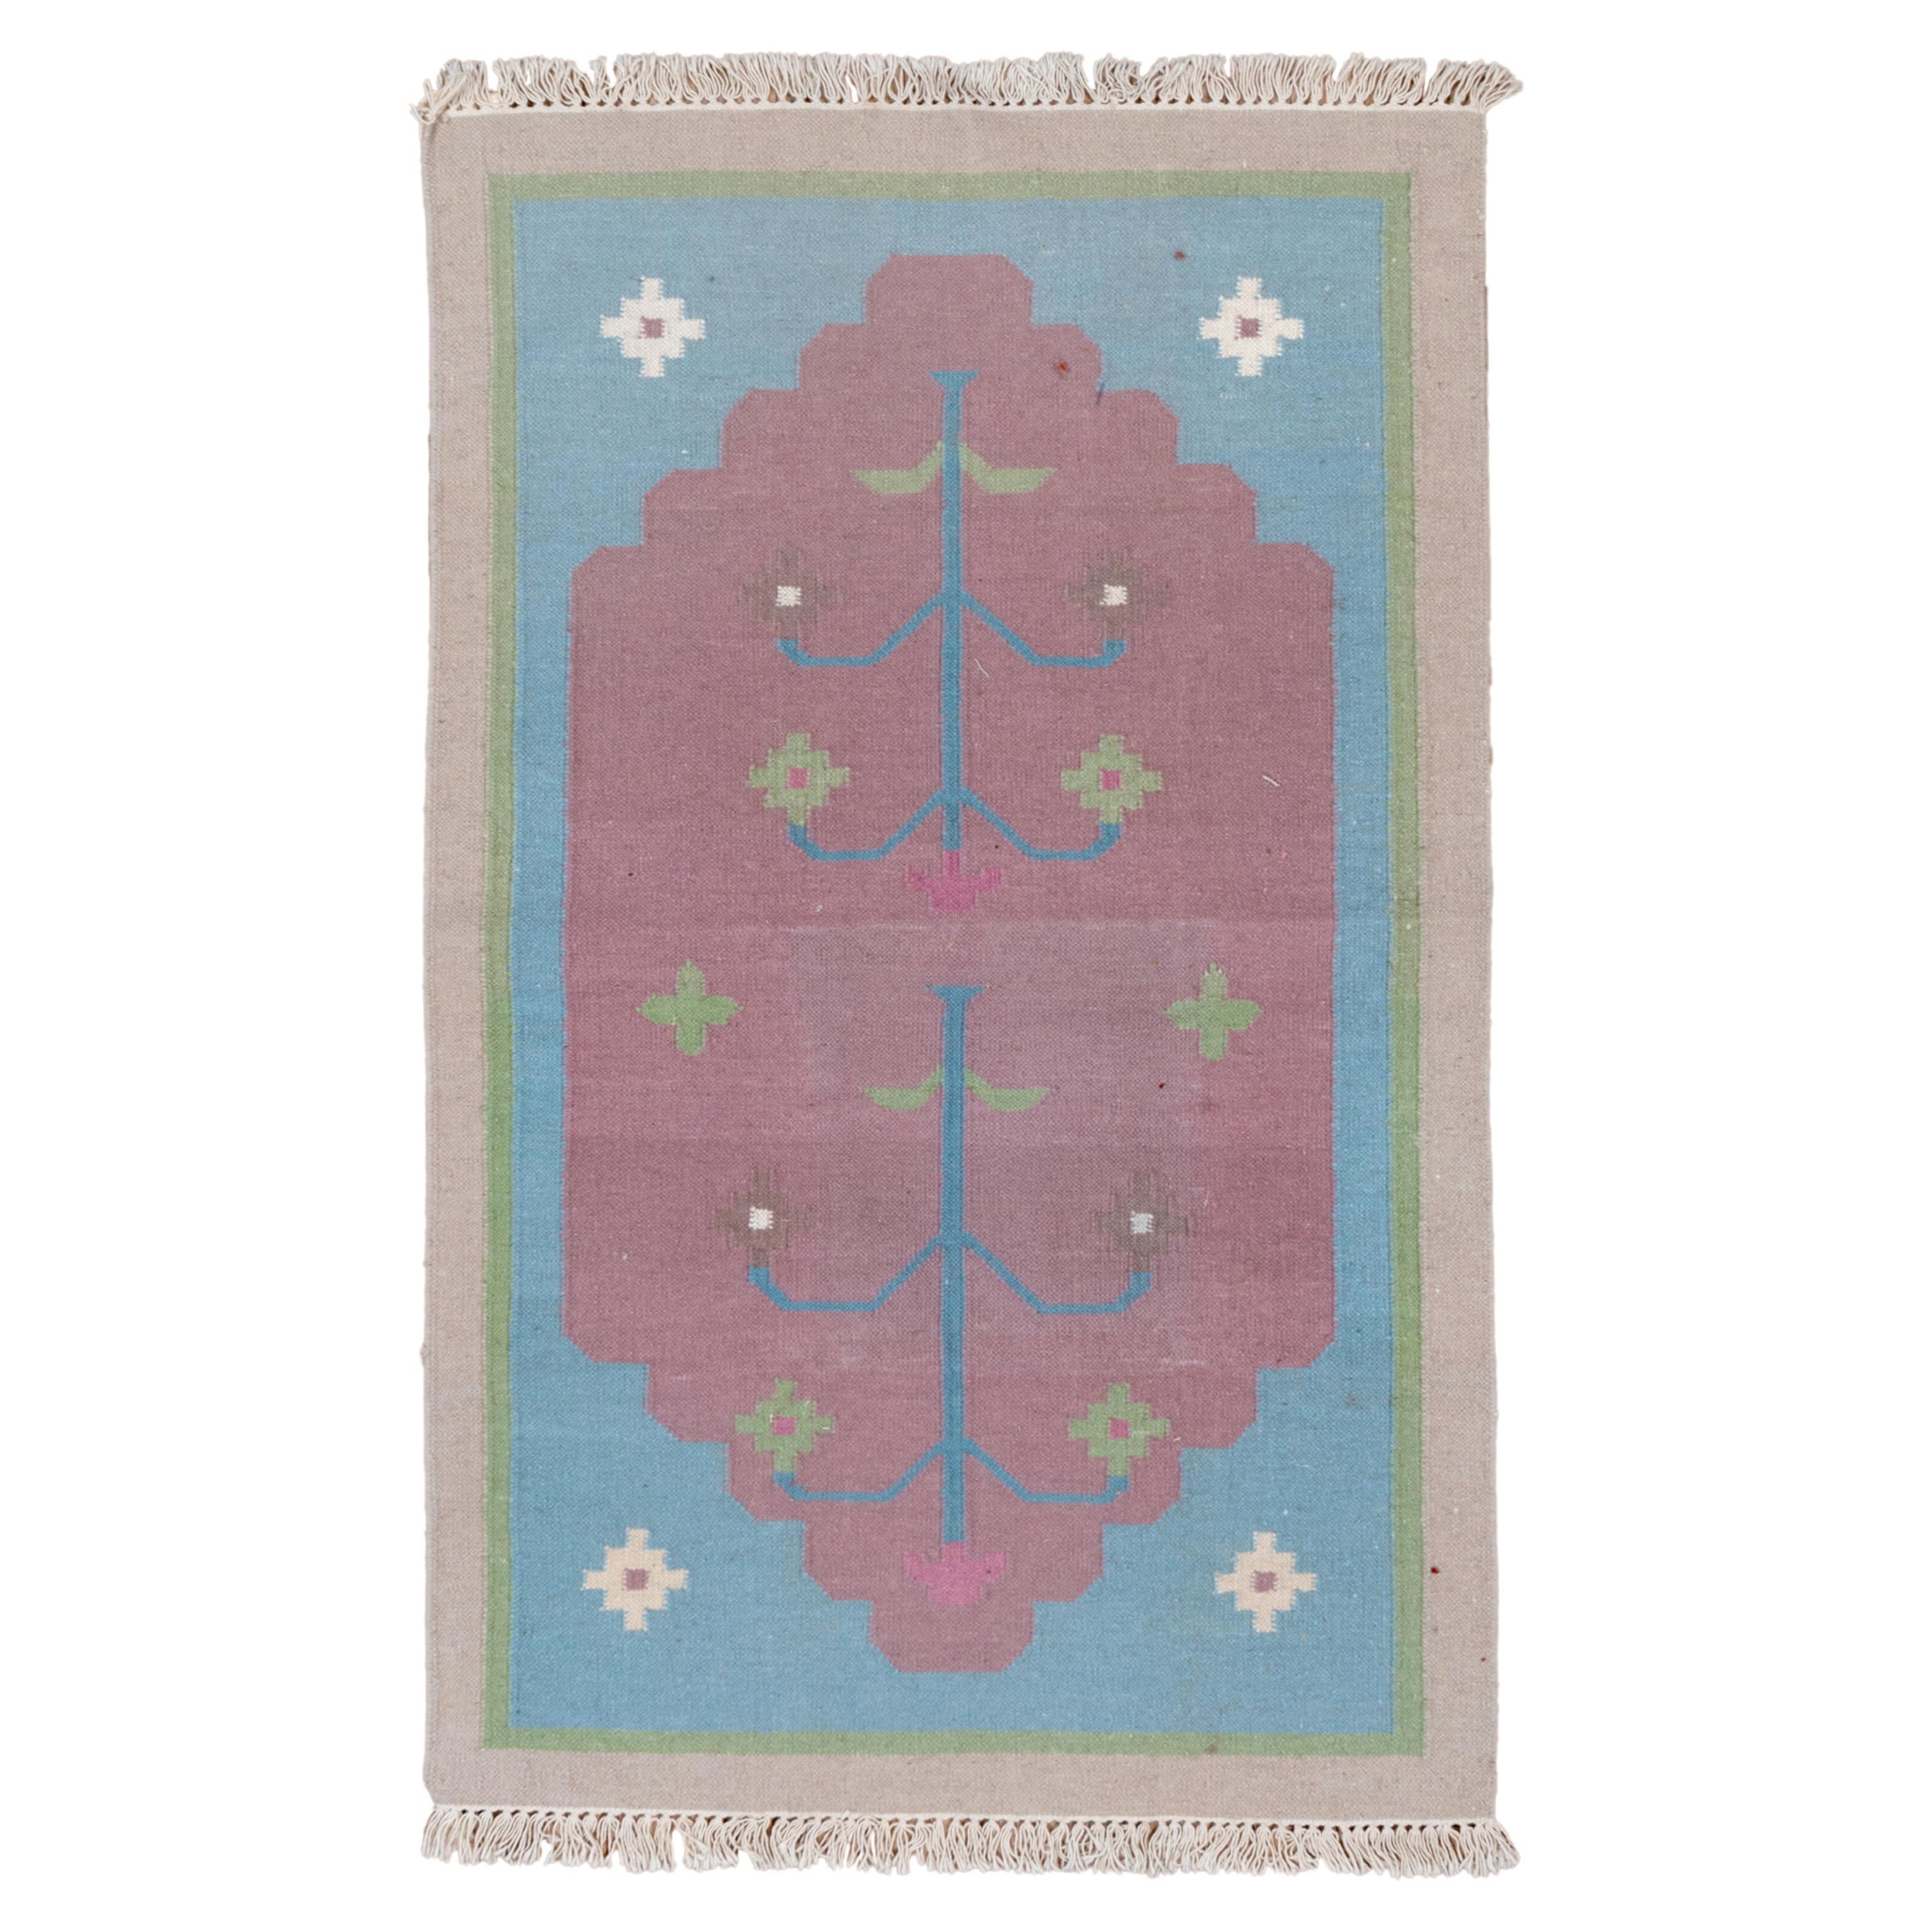 This fairly well-woven, tapestry technique, all-cotton scatter presents a luminous light blue field with off-white stepped cross corner pieces, supporting a partially cusped, abrashed pink sub-field with a central stylized tree, and stepped and